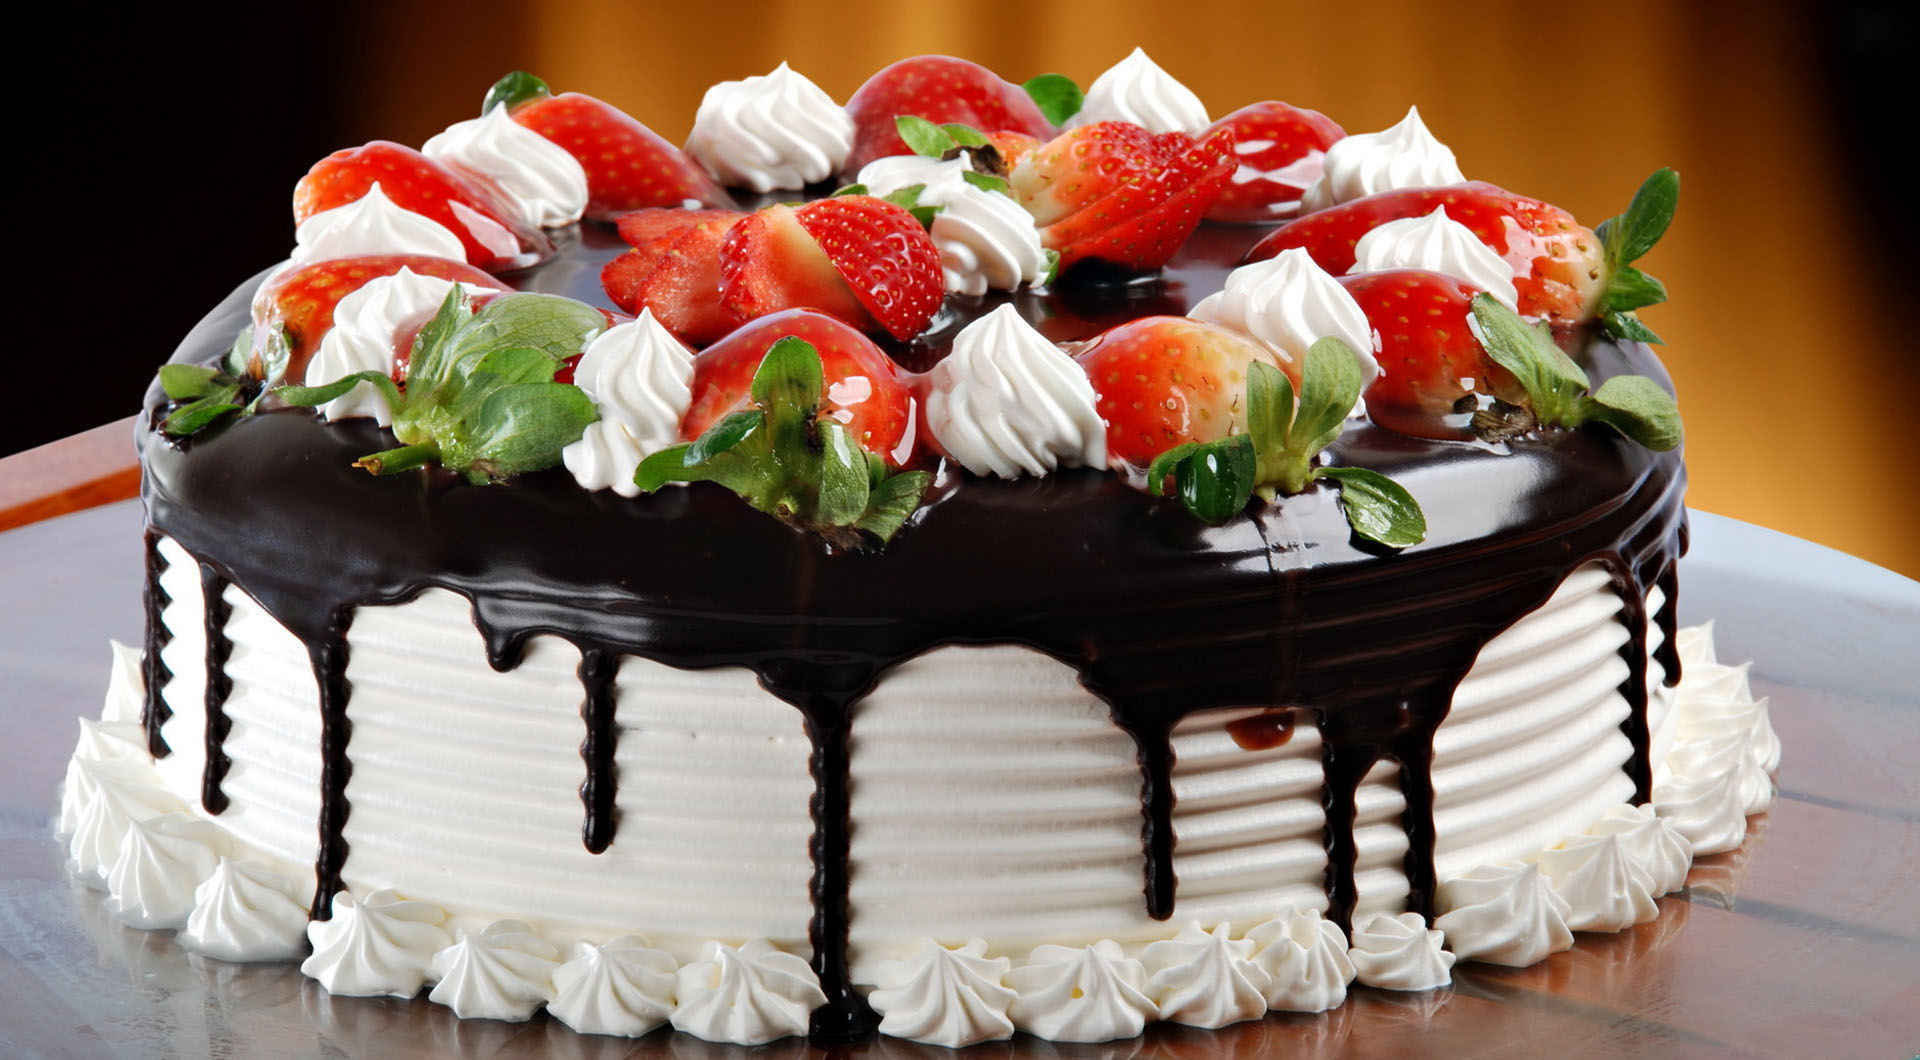 Image for Cake Orders at Albertsons.